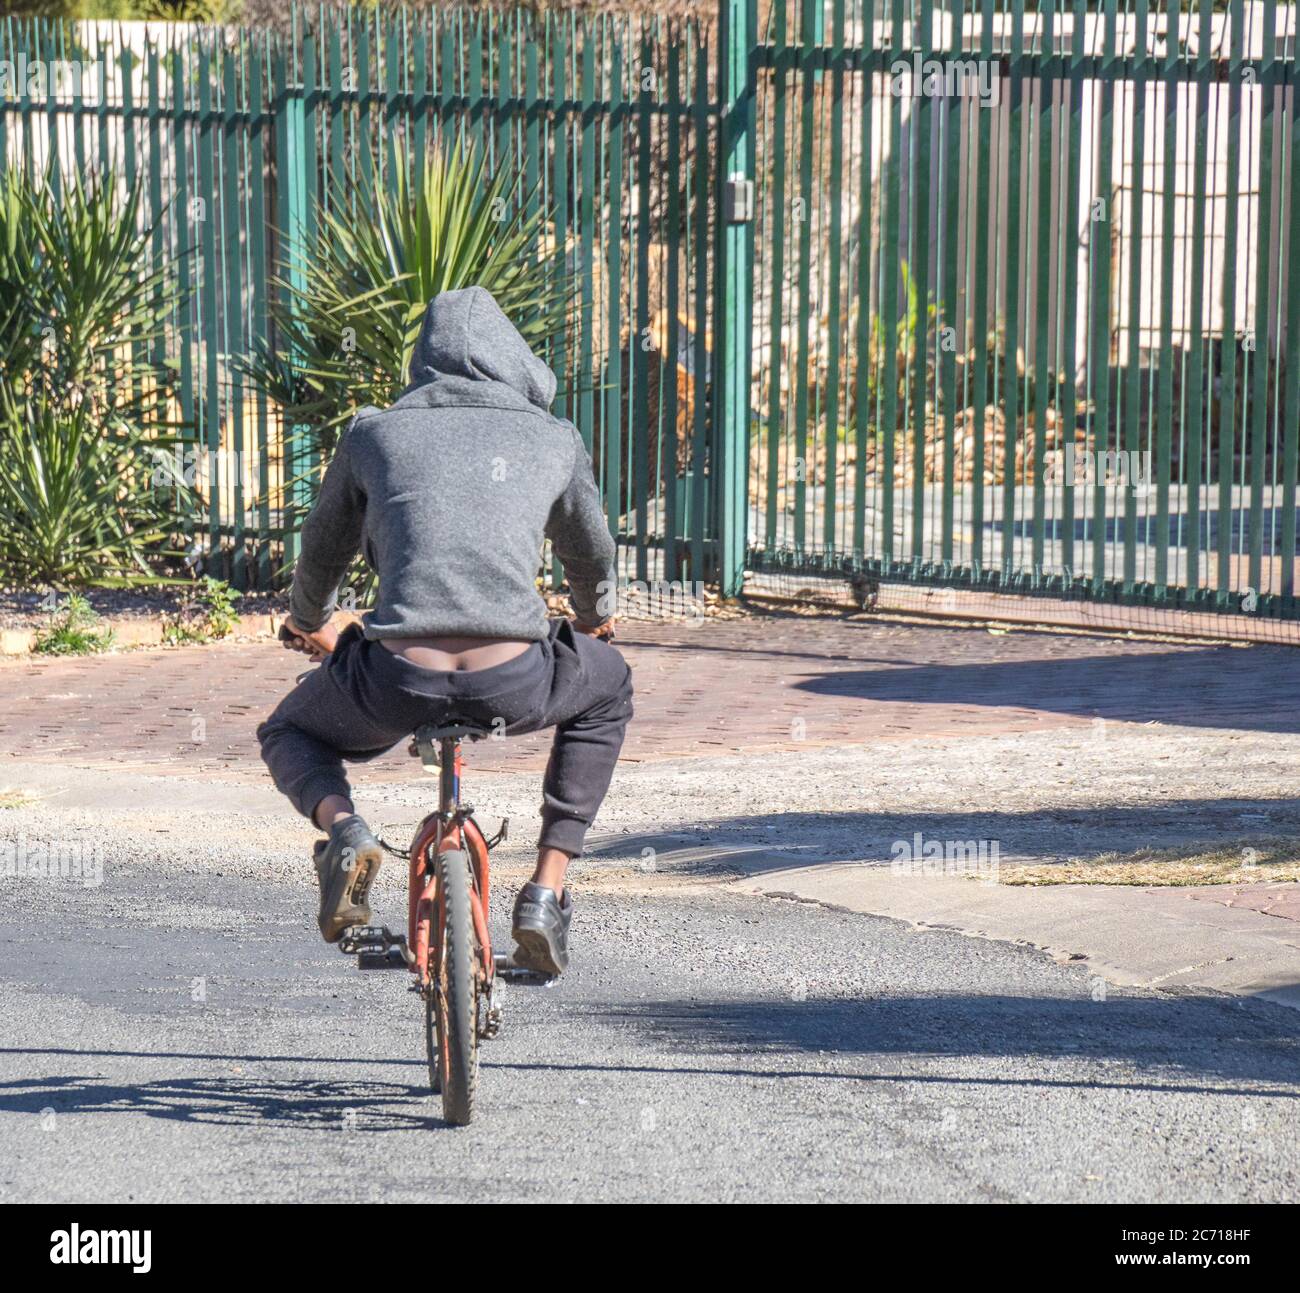 Alberton, South Africa - unidentified black youth rides a small bicycle in a public street image in landscape format Stock Photo